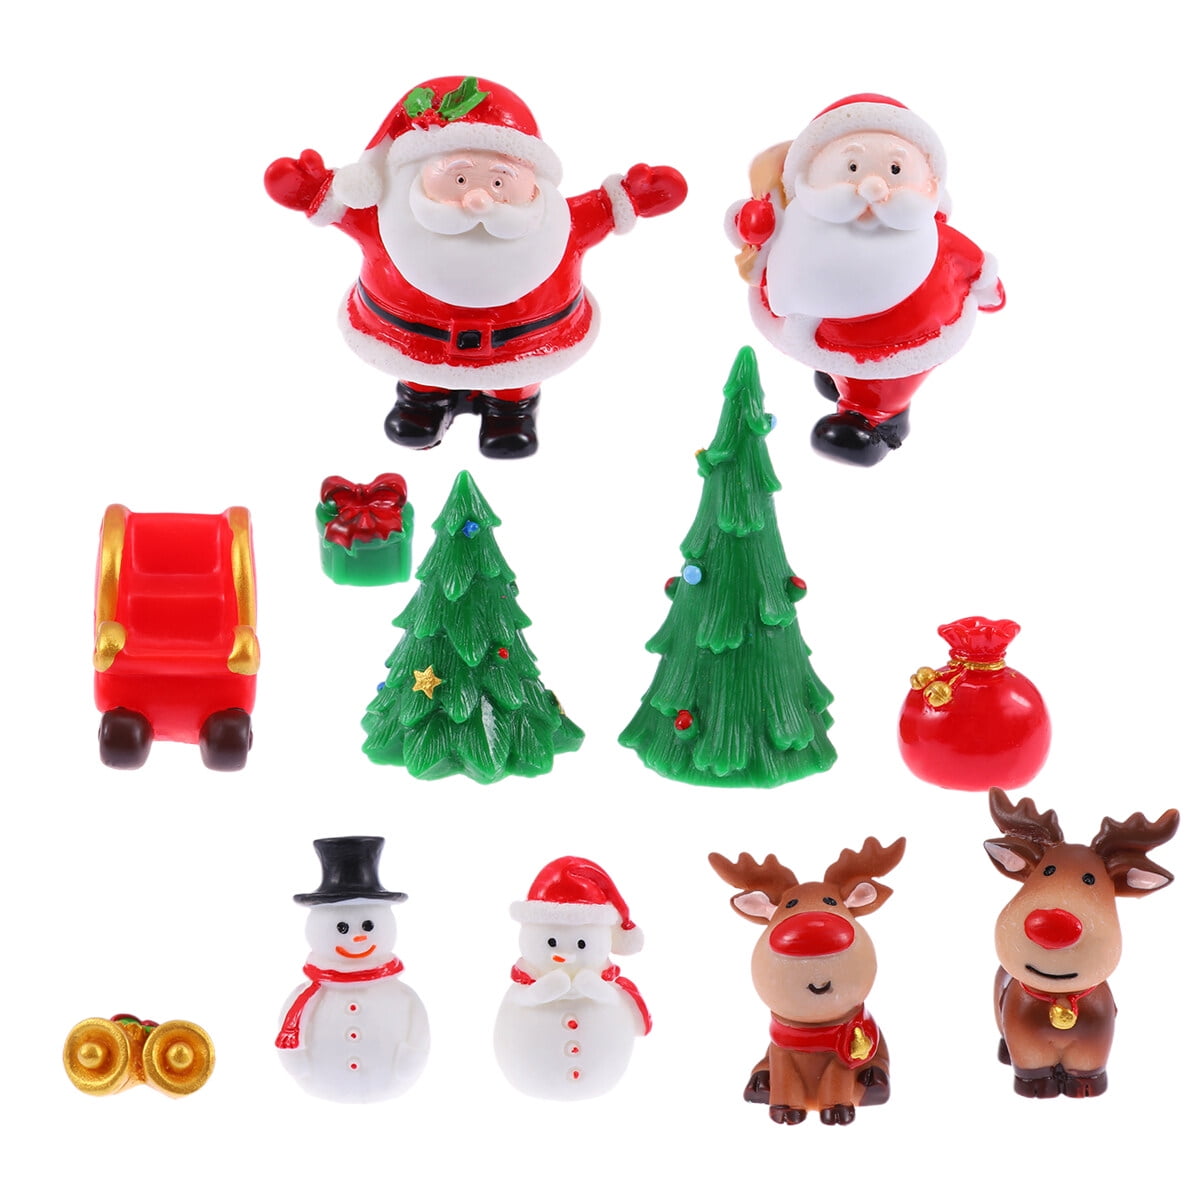 UDIYO 2pcs Christmas Miniature Ornaments , Resin Mini Christmas Ornaments  Santa Claus Snowman Christmas And Other Animals Figurines Decoration for